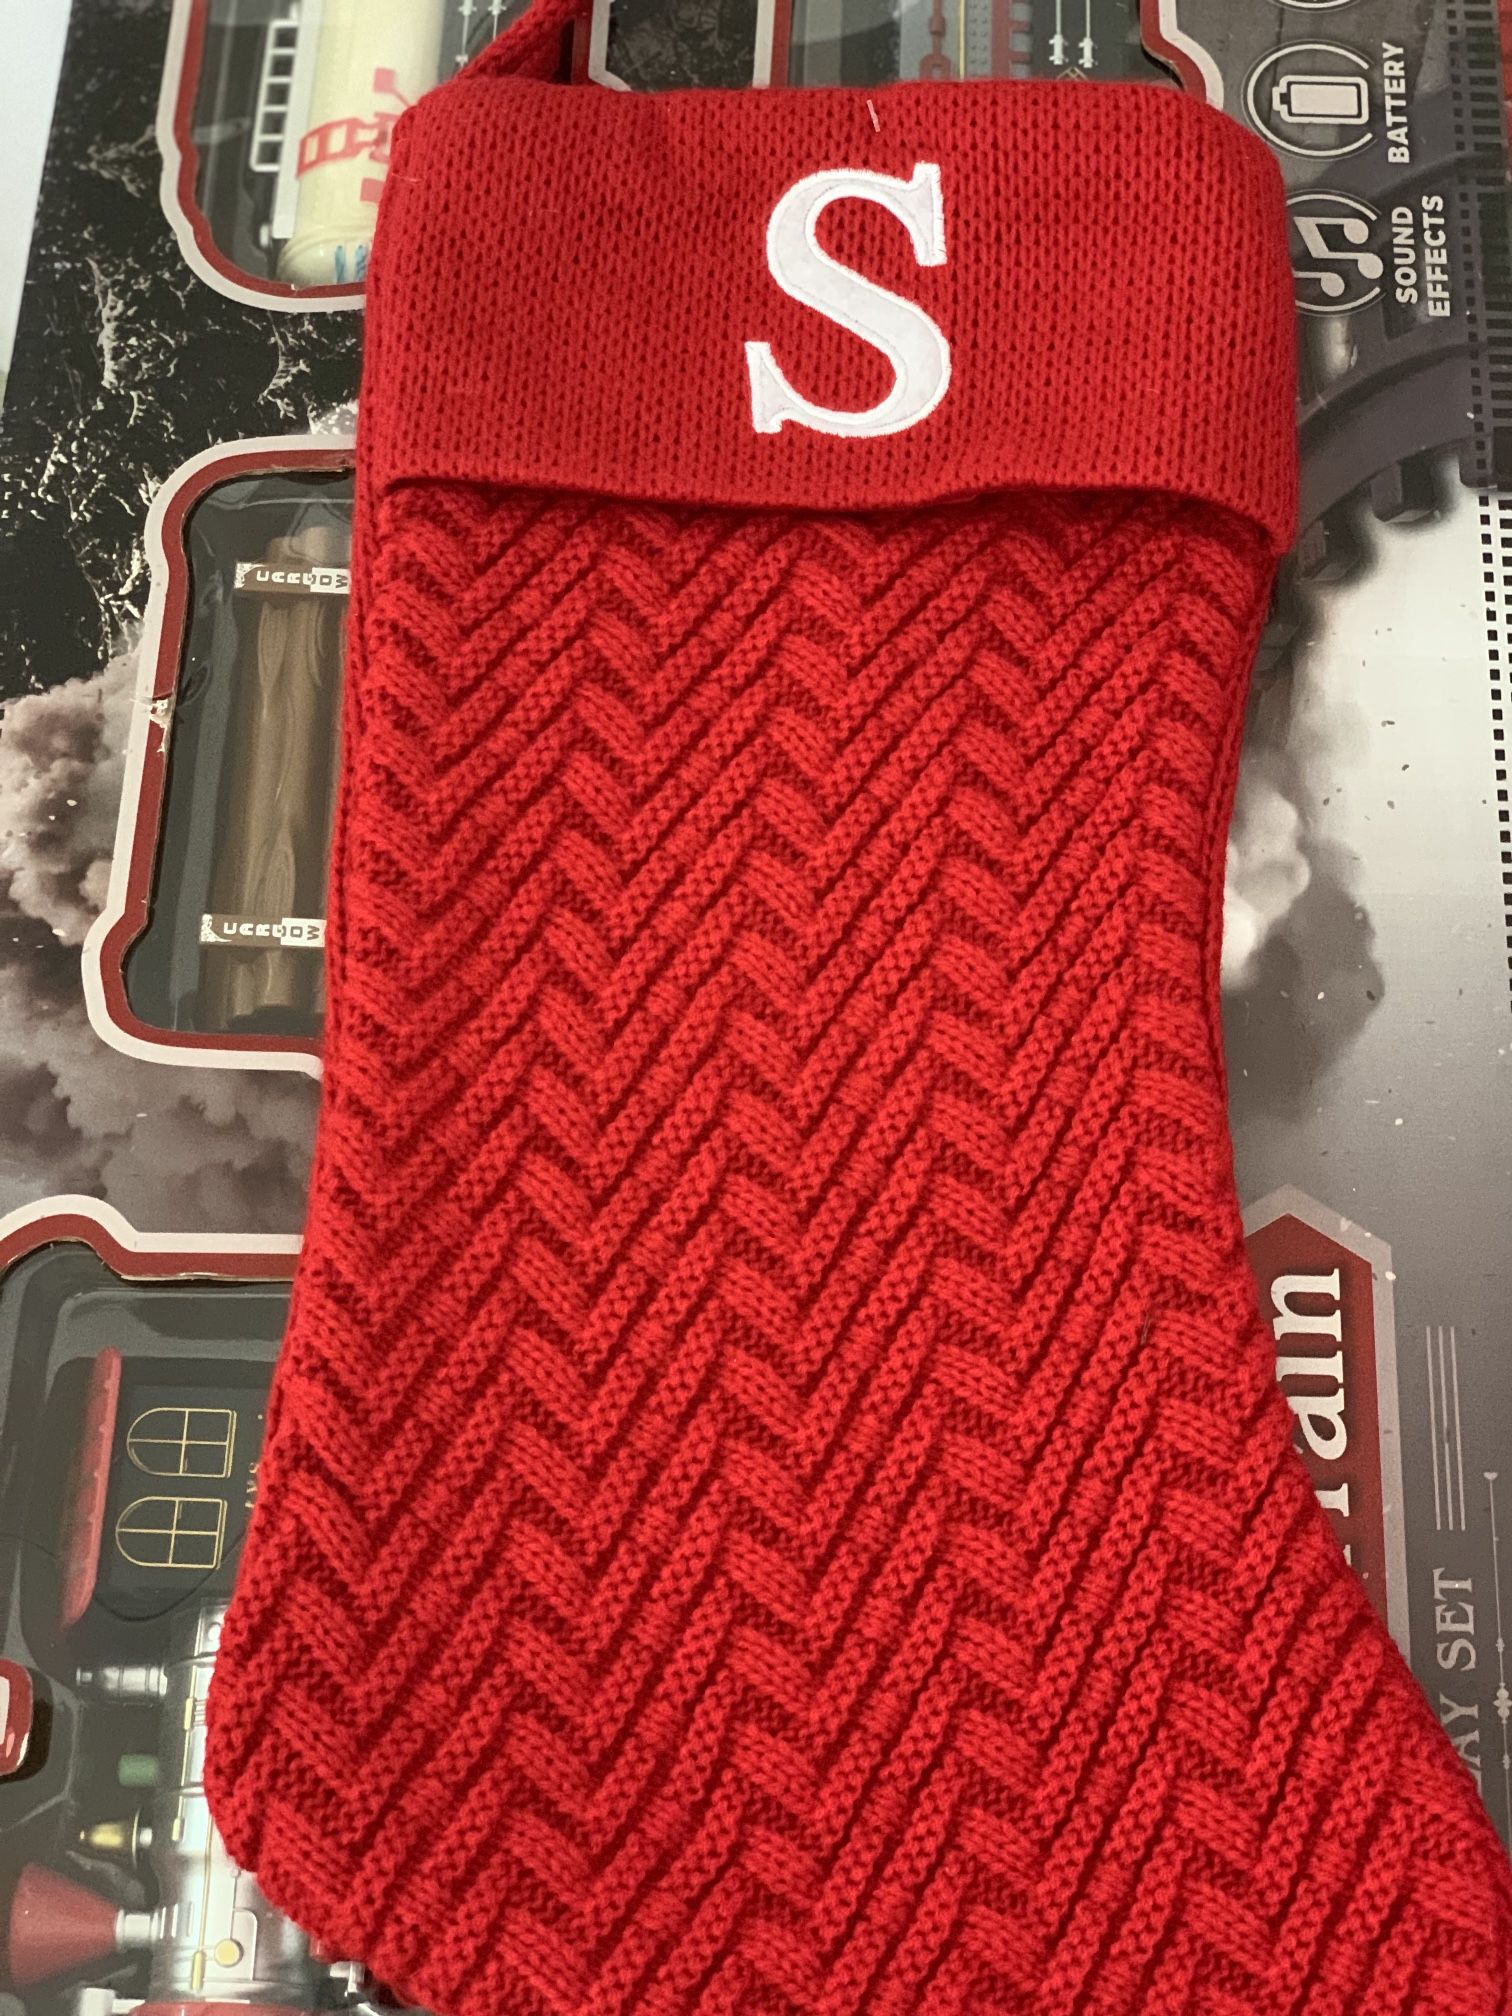 The Letter S Stocking 